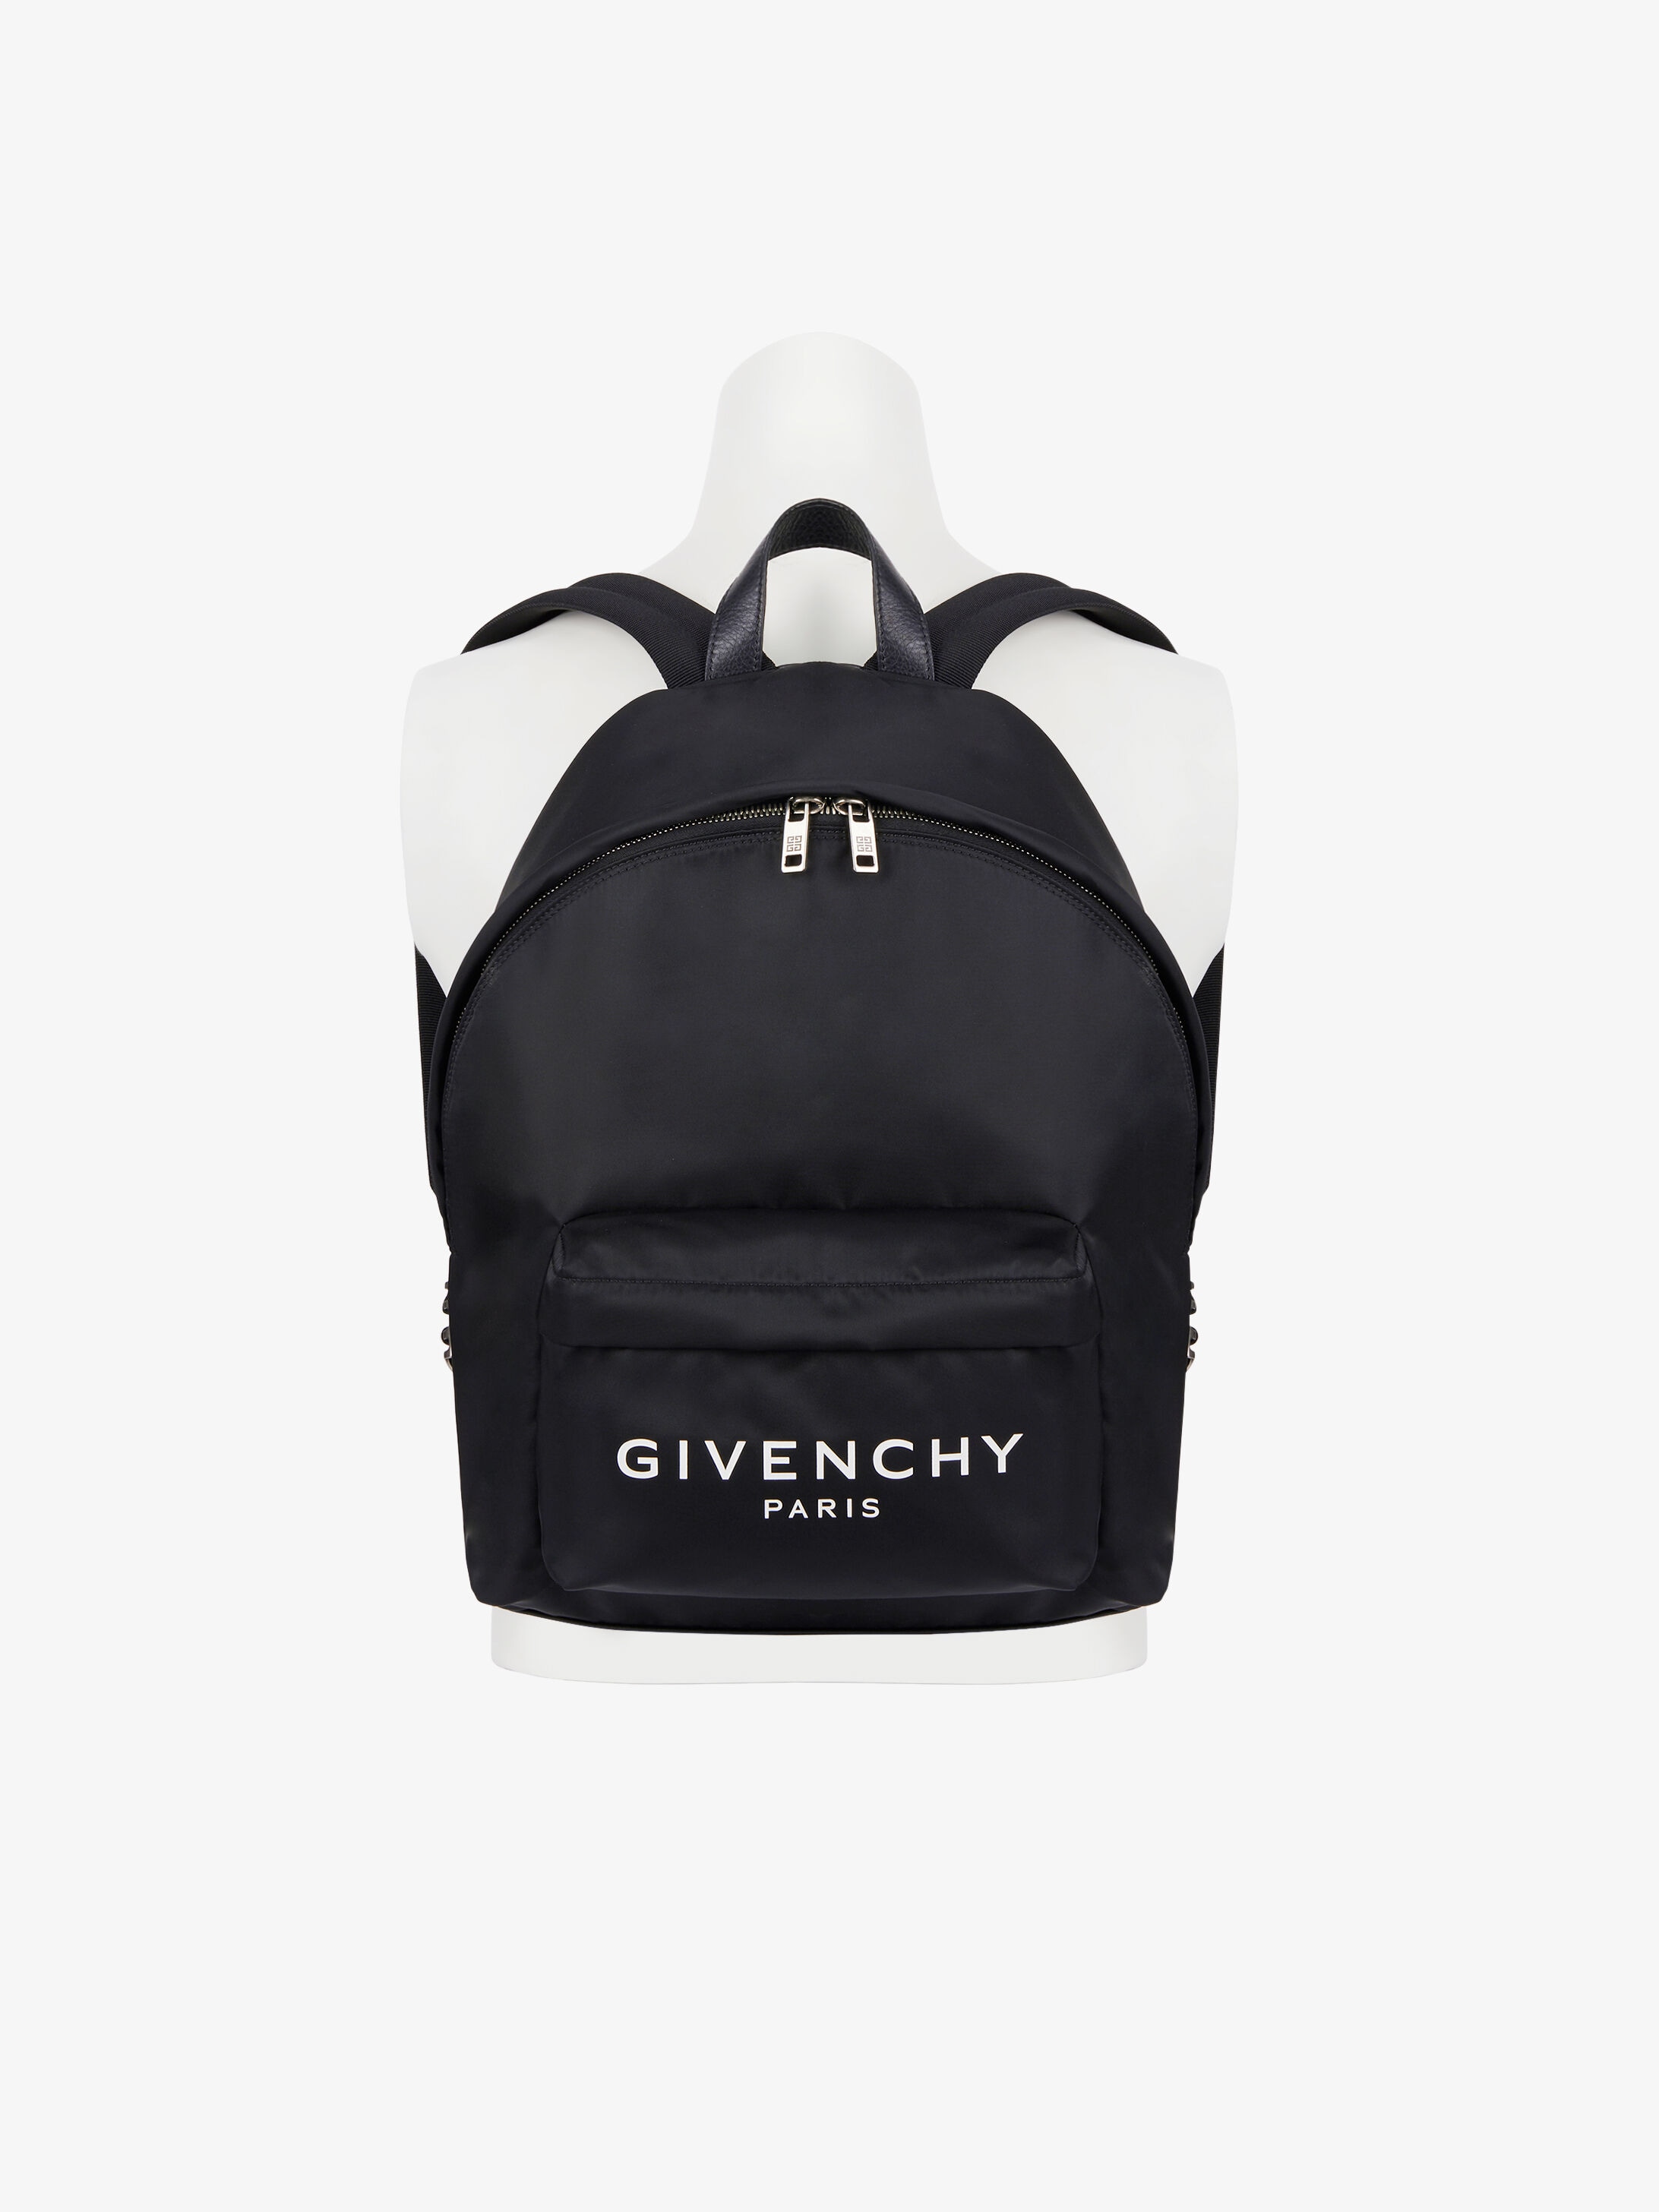 GIVENCHY PARIS backpack in nylon 